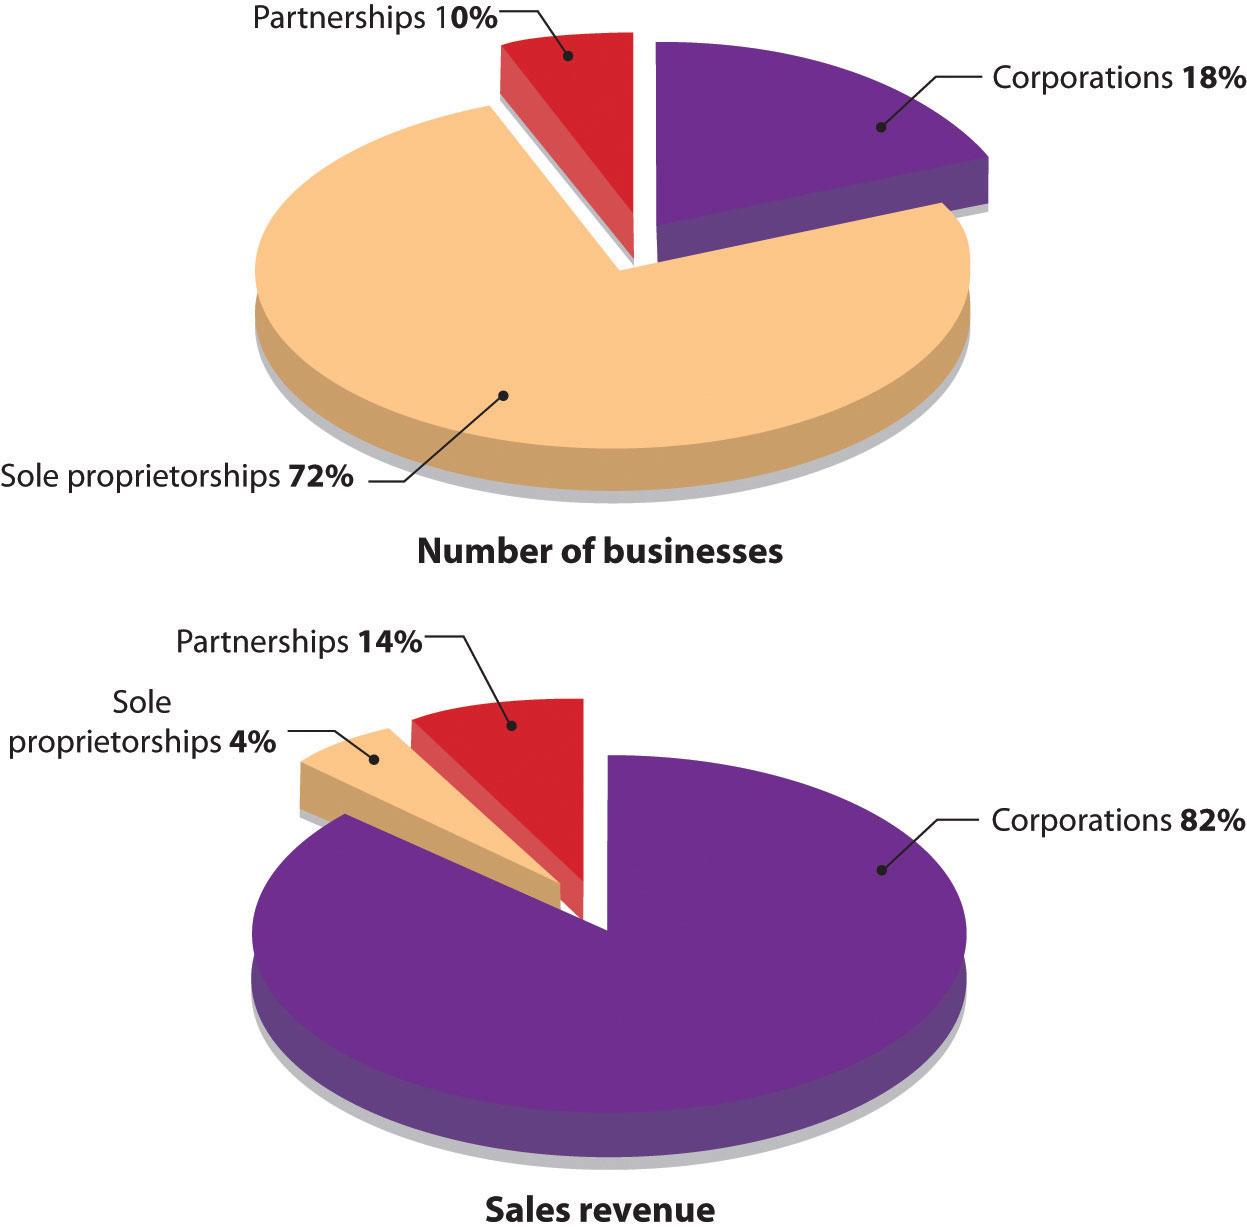 Two pie charts. The number of businesses chart has three sections: 72% sole proprietorships, 18% corporations, and 10% partnerships. The sales revenue chart has three sections: 82% corporations, 14% partnerships, and 4% sole proprietorships. 